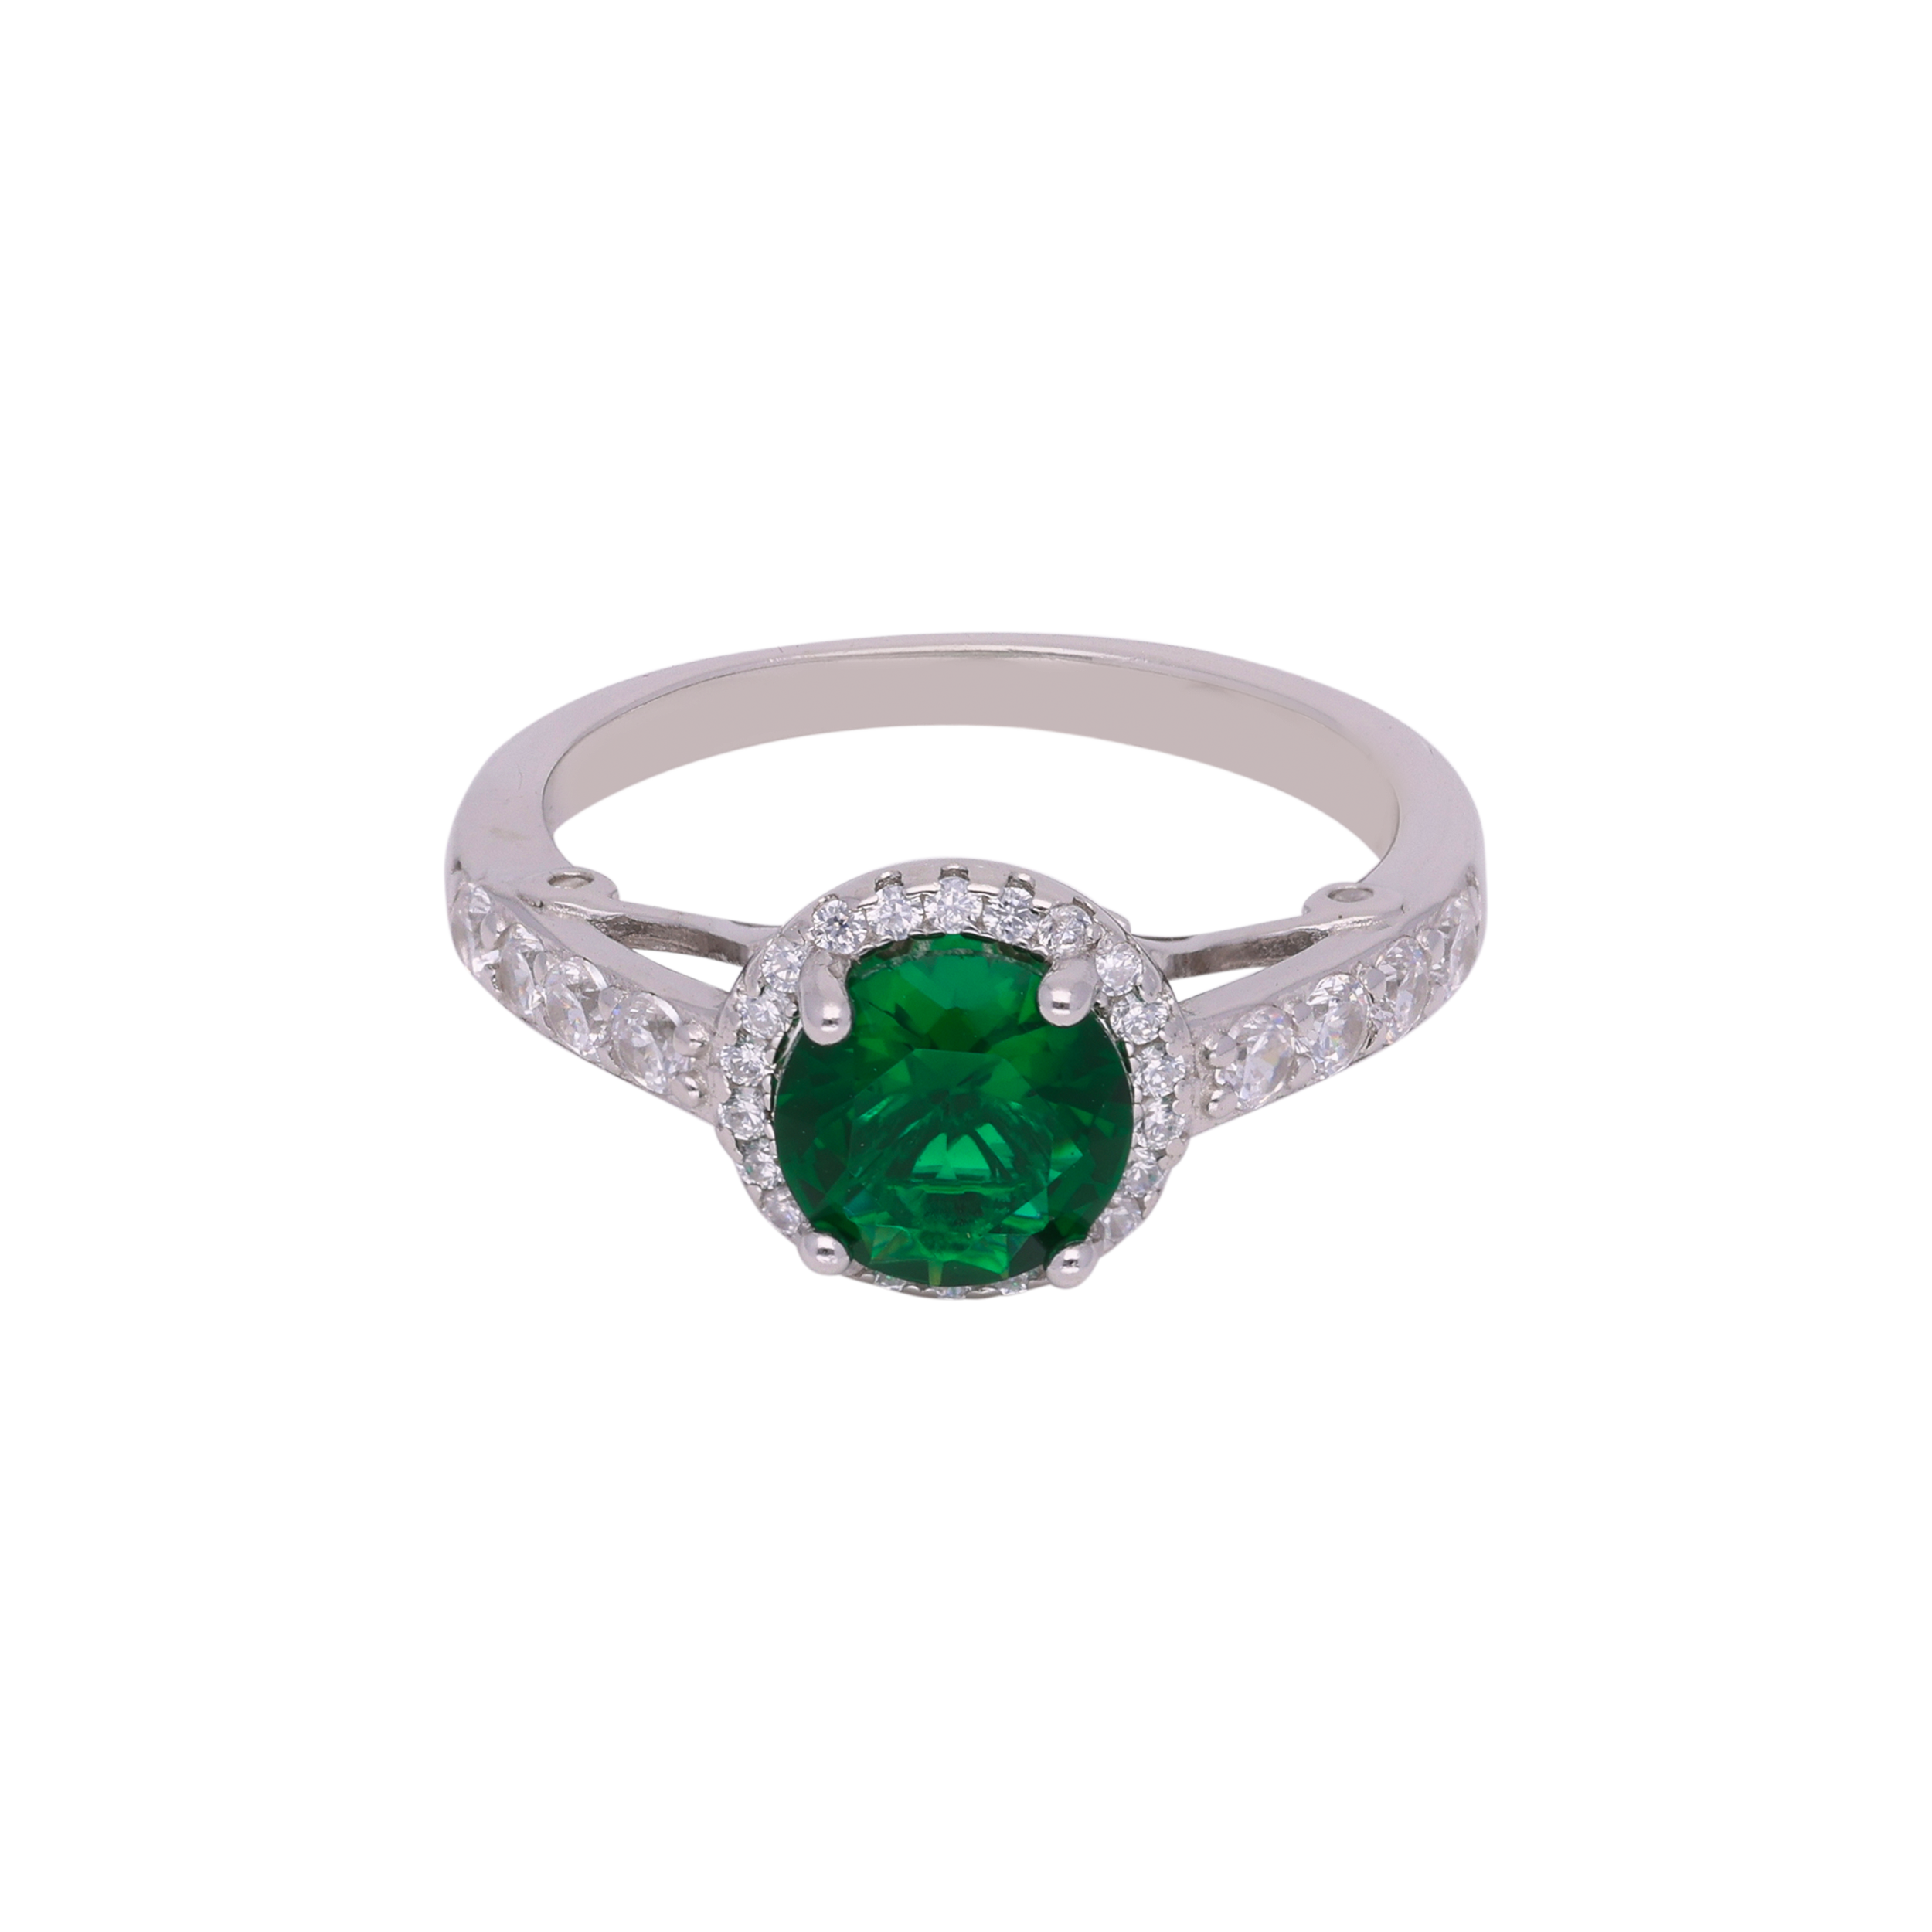 Emerald Radiance: Sterling Silver Solitaire Ring with Green Stone and Cubic Zircon Accents | SKU : 0003114537